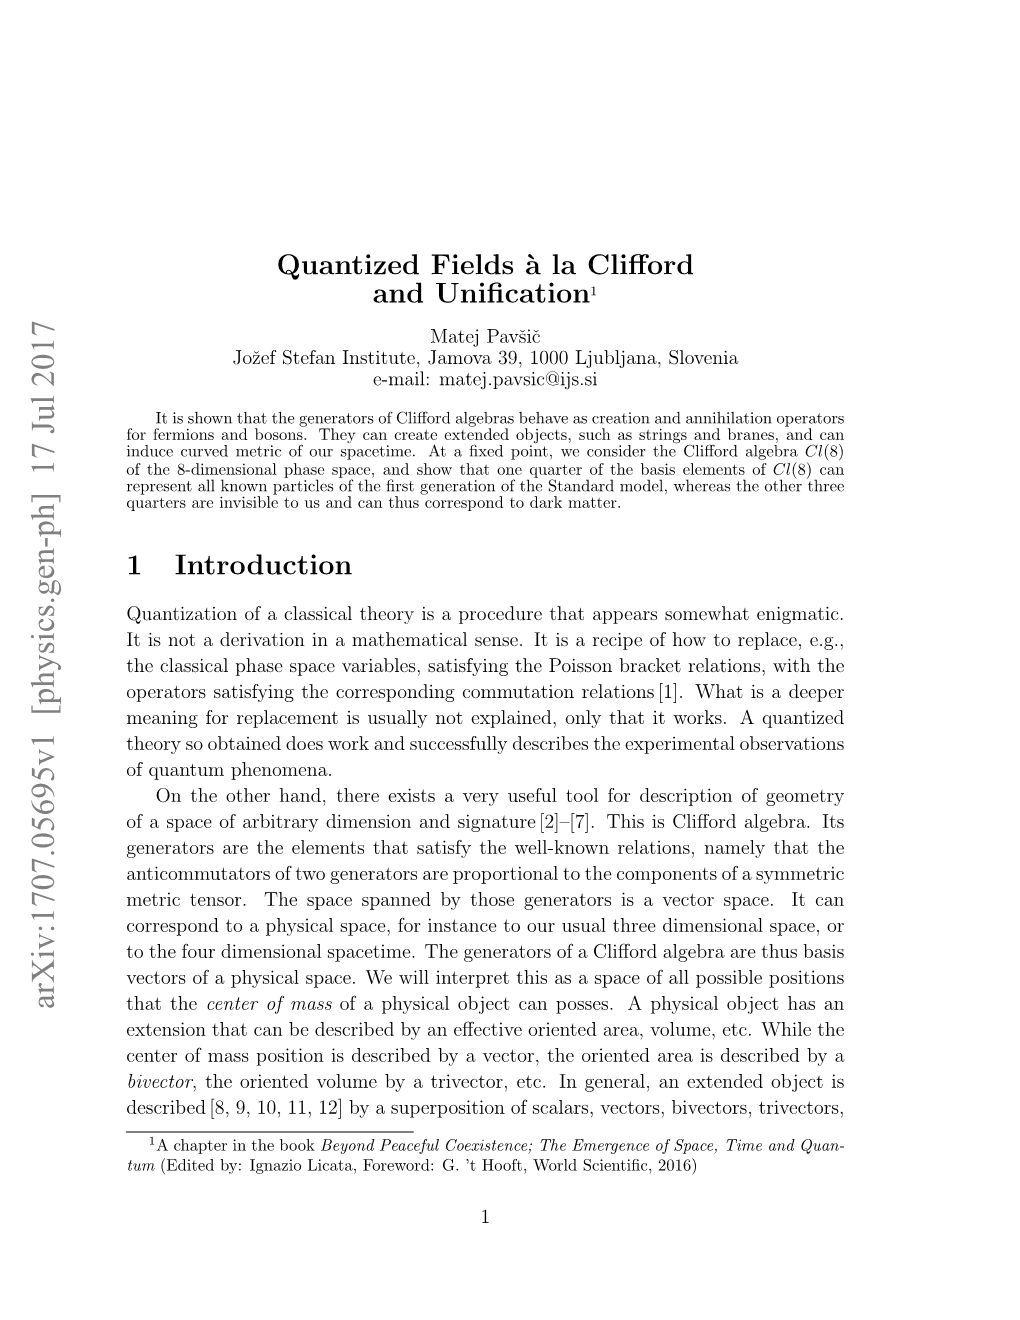 Quantized Fields\A La Clifford and Unification